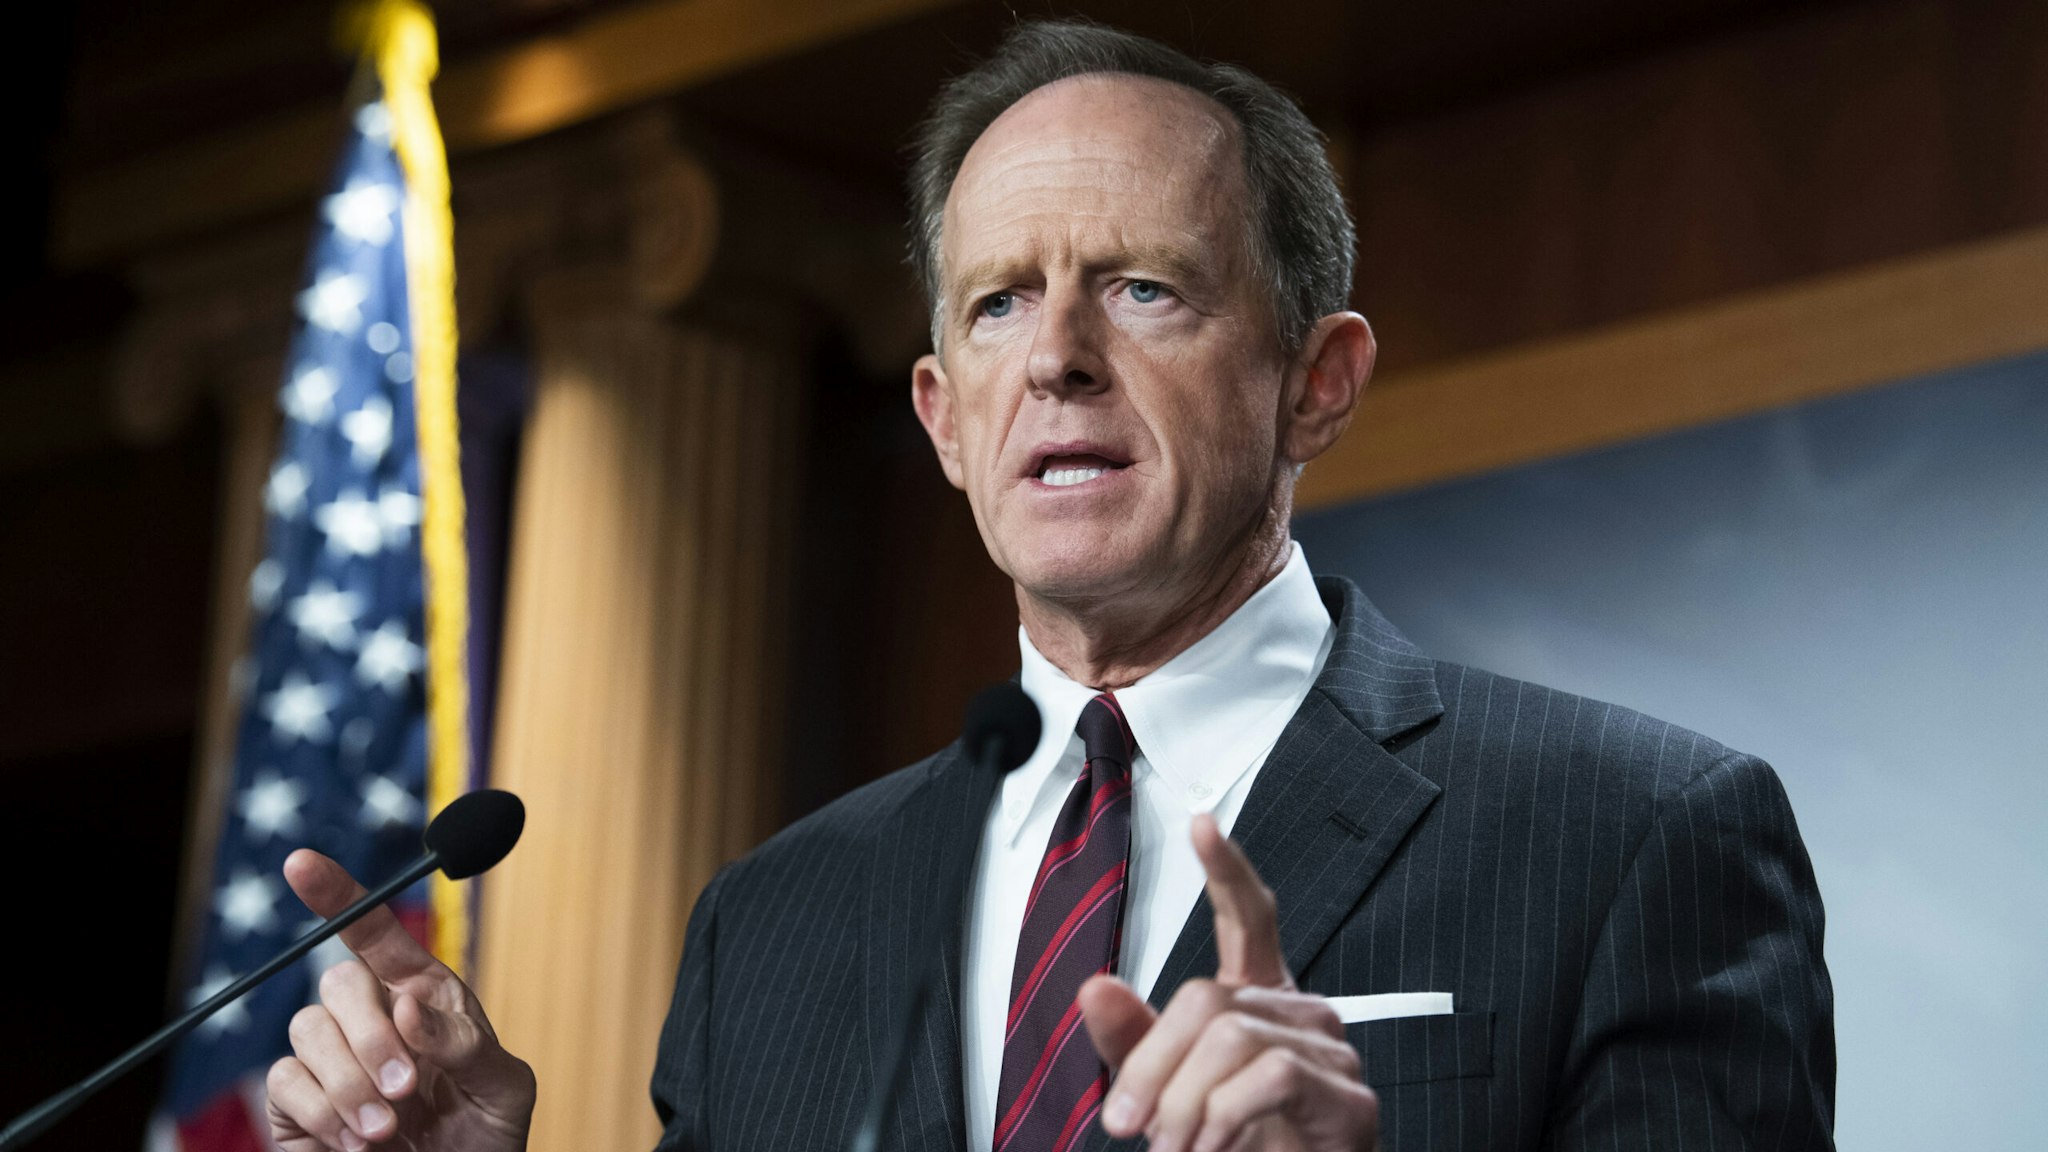 UNITED STATES - AUGUST 9: Sen. Pat Toomey, R-Pa., conducts a news conference on a bipartisan agreement to fix the digital asset reporting requirements in the infrastructure bill, in the U.S. Capitol on Monday, August 9, 2021. Sen. Cynthia Lummis, R-Wyo., also attended.